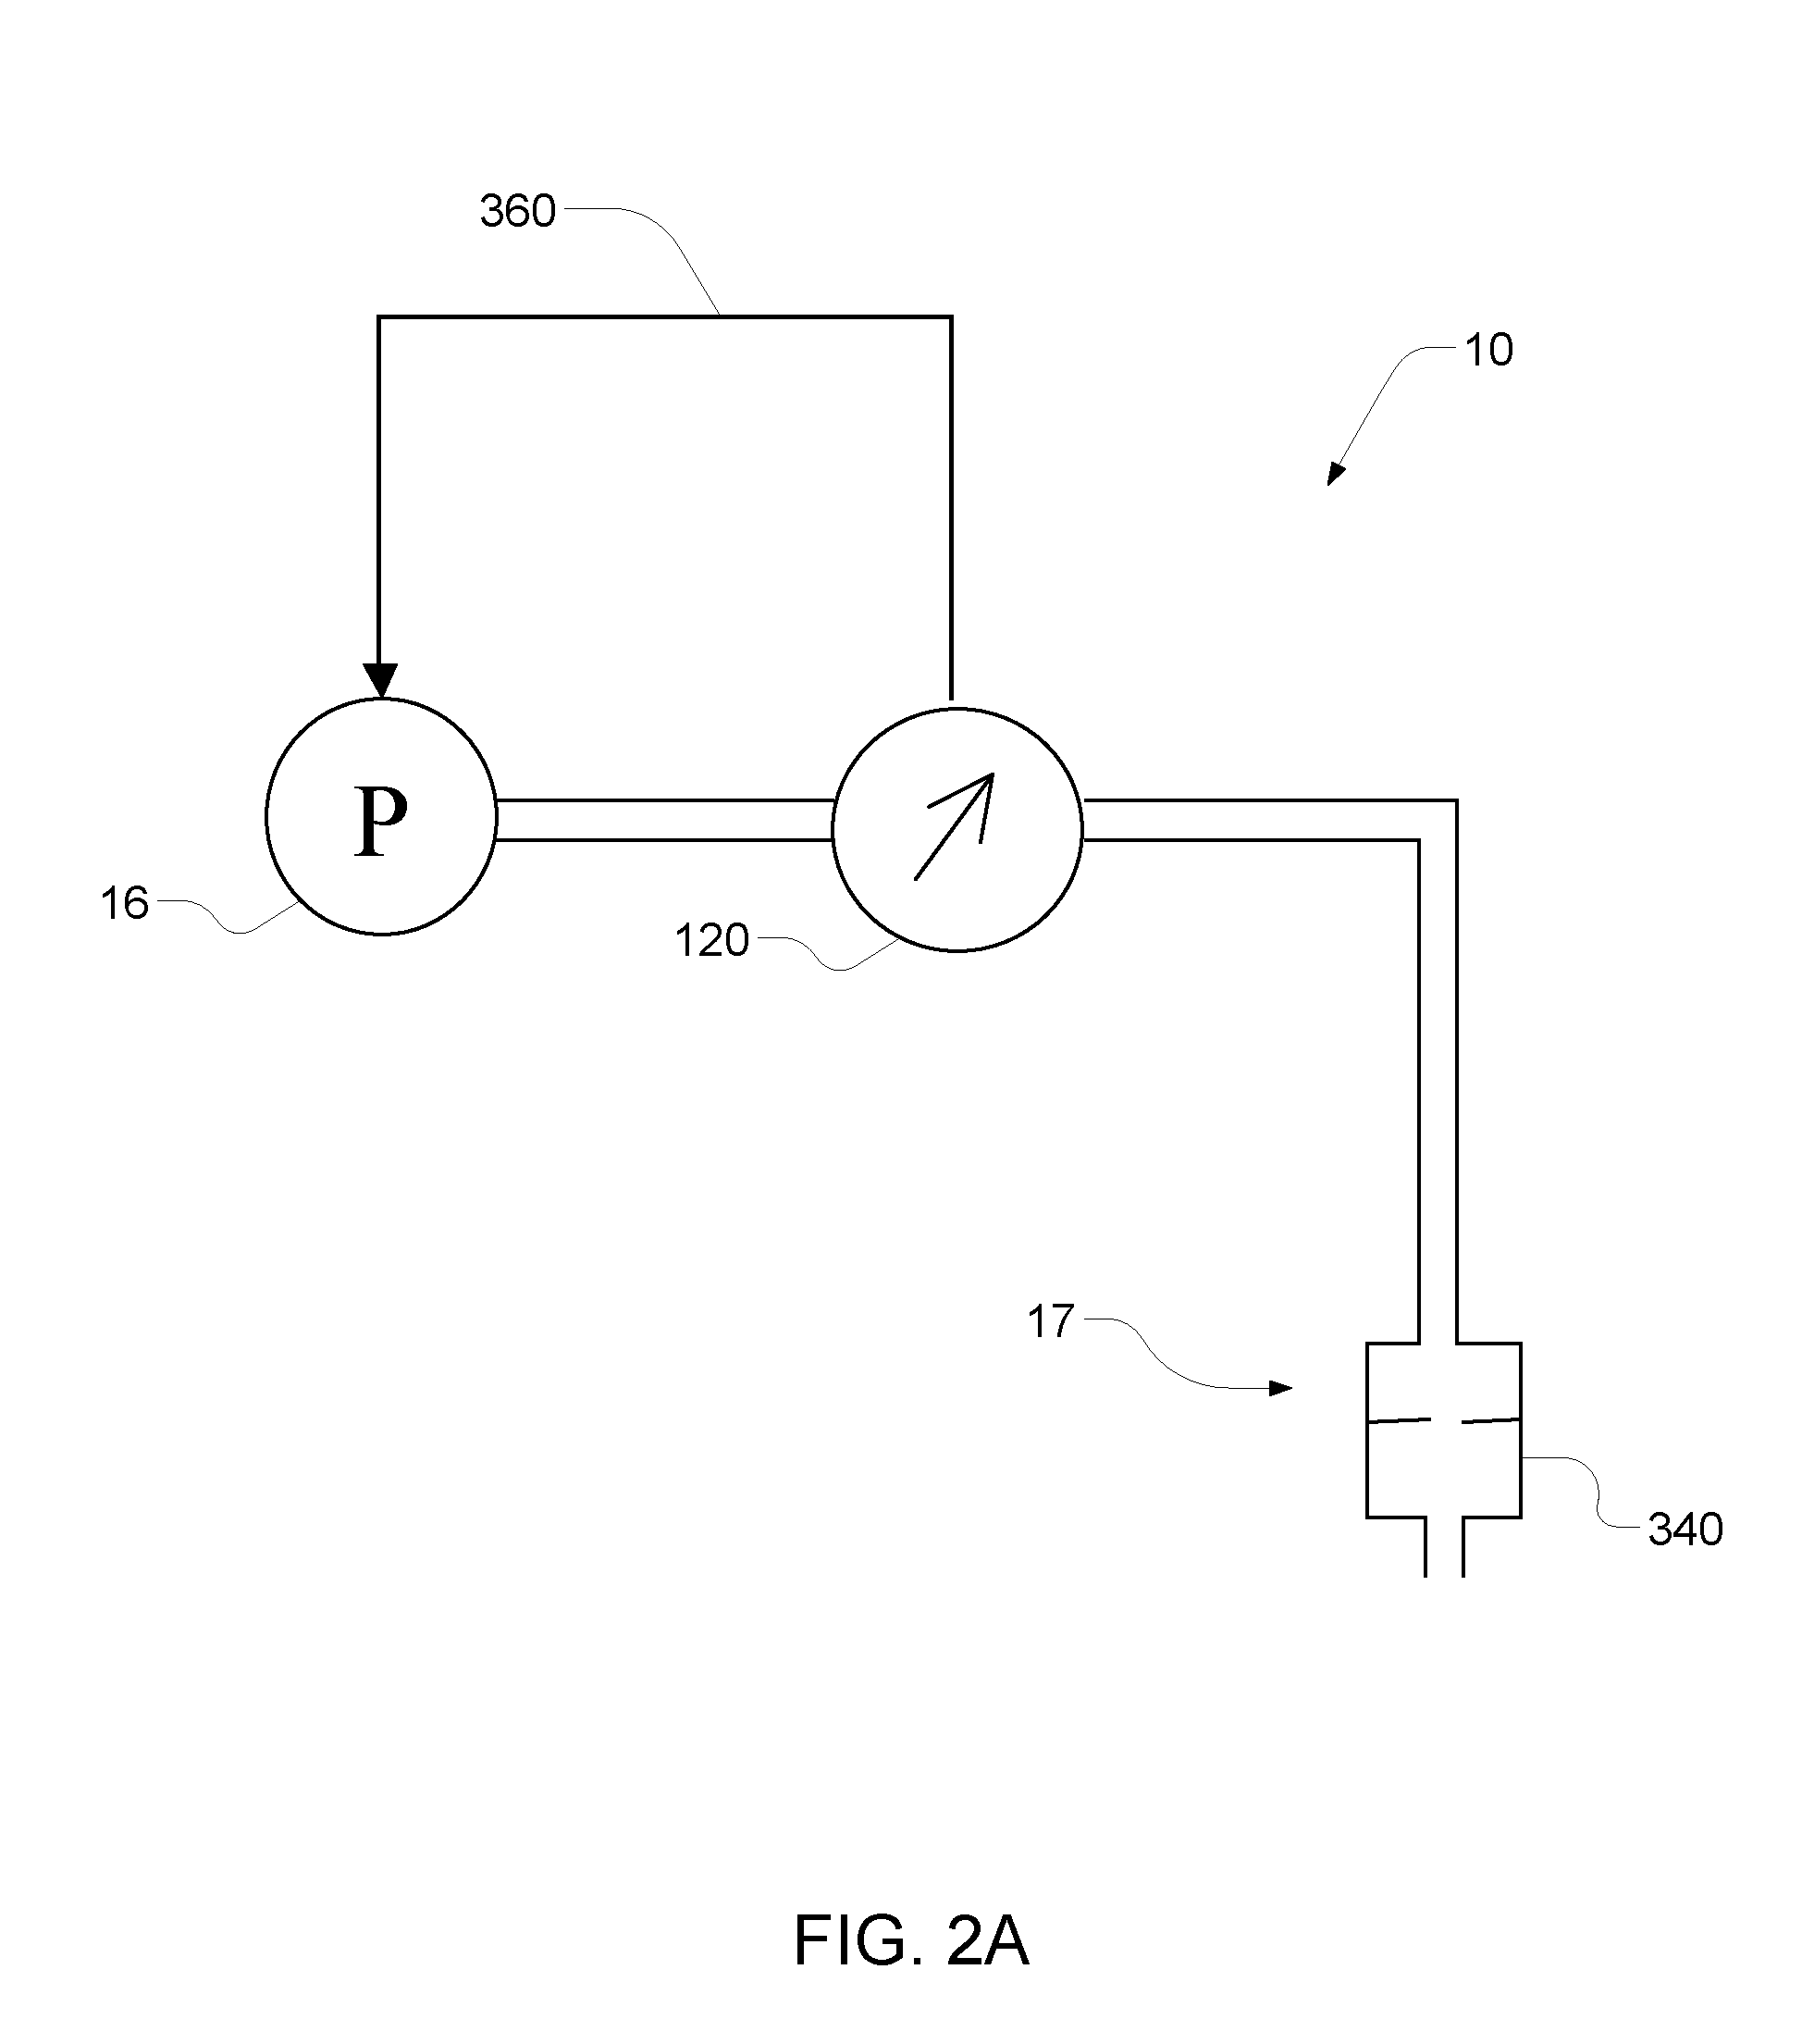 Patch-sized fluid delivery systems and methods